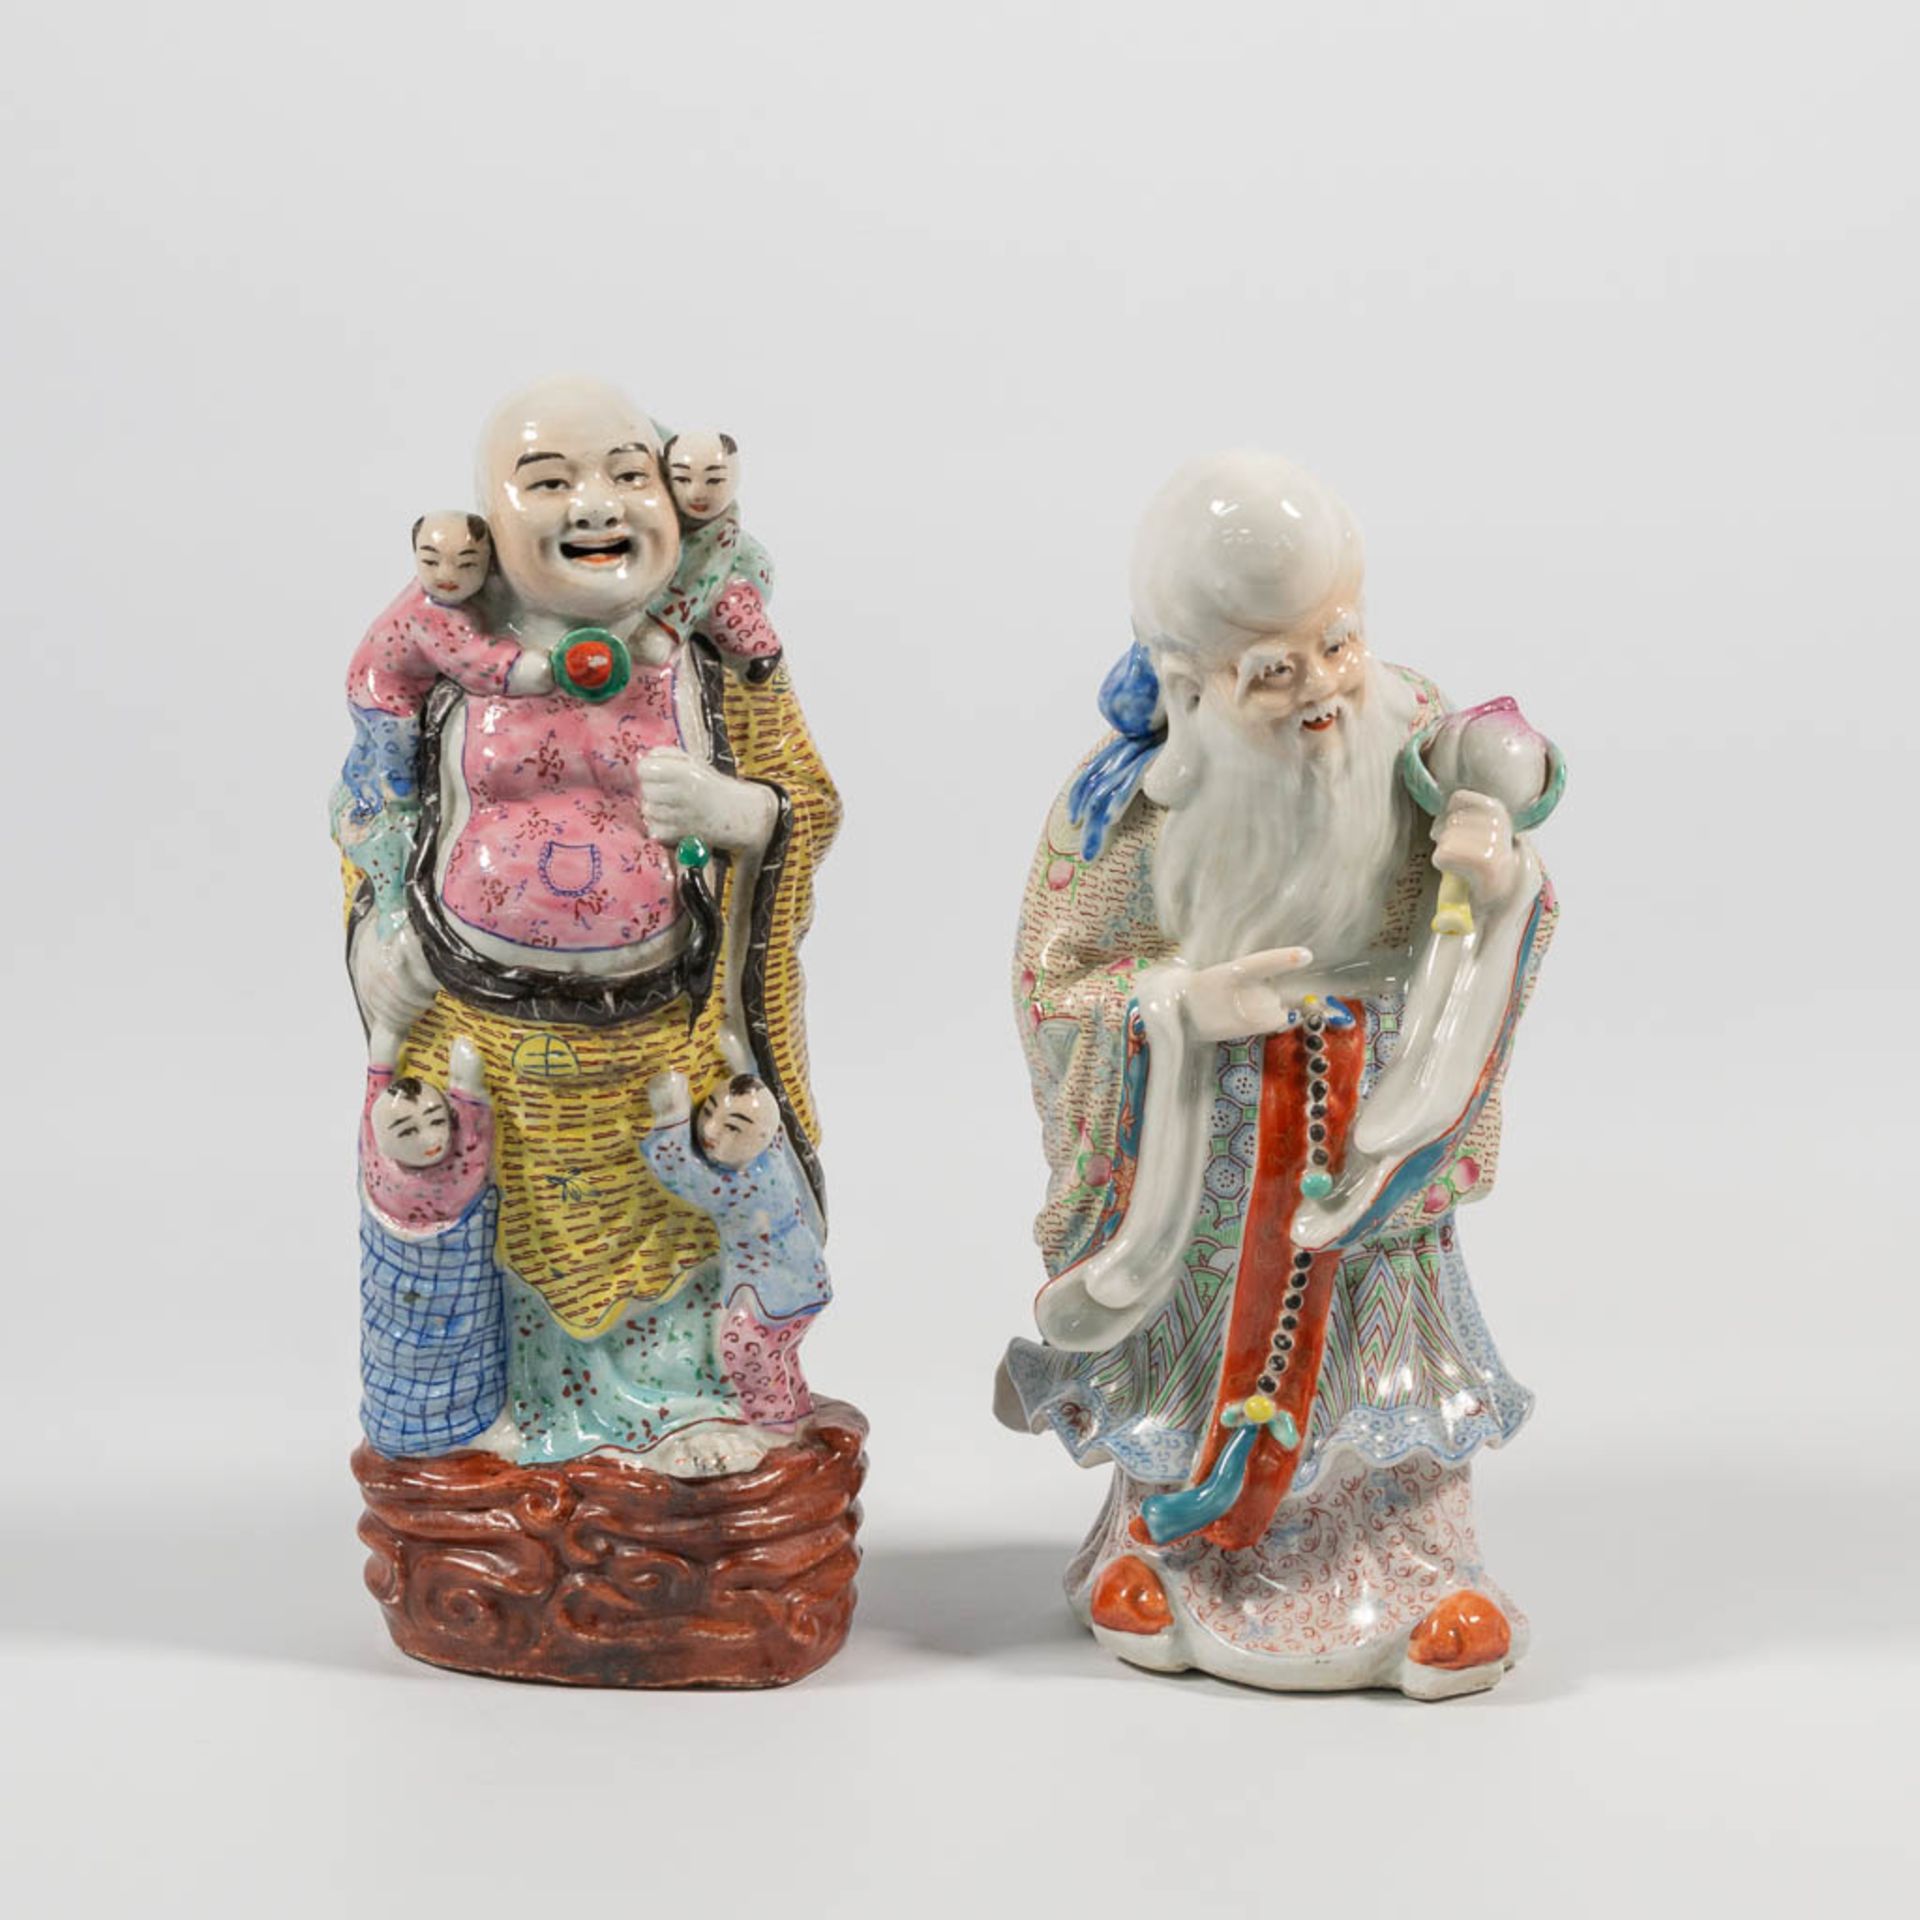 A Collection of 4 Chinese immortal figurines, made of porcelain. - Image 8 of 25